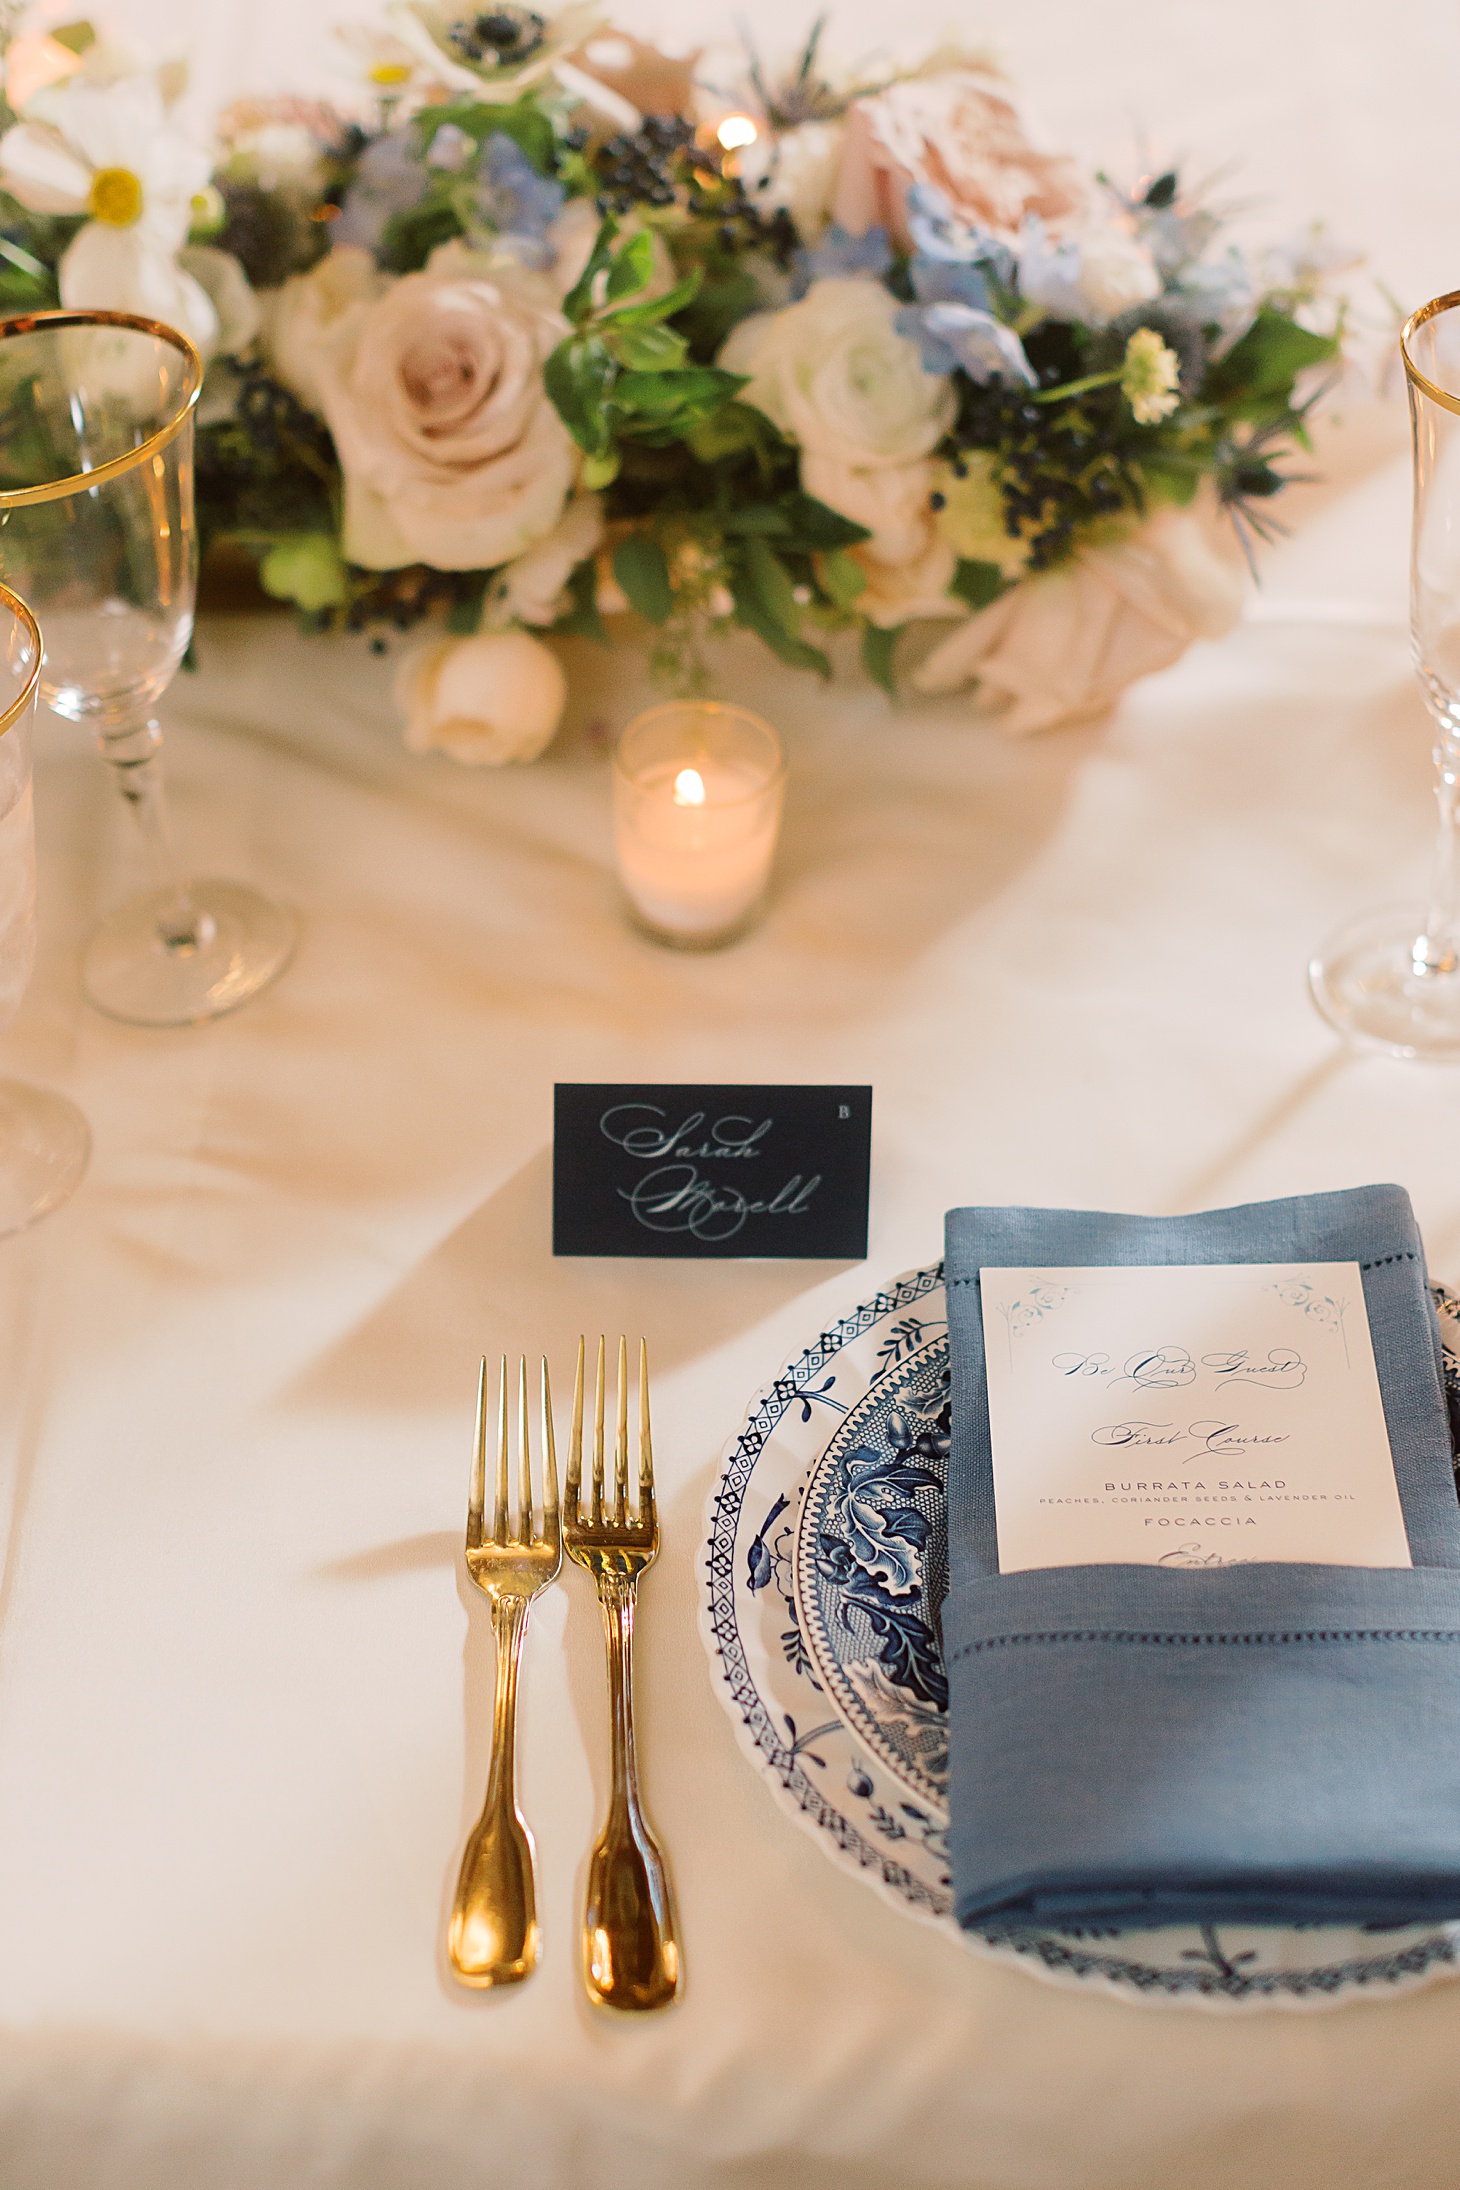 Chinoiserie dinner plates at Anderson House Wedding by Sarah Bradshaw